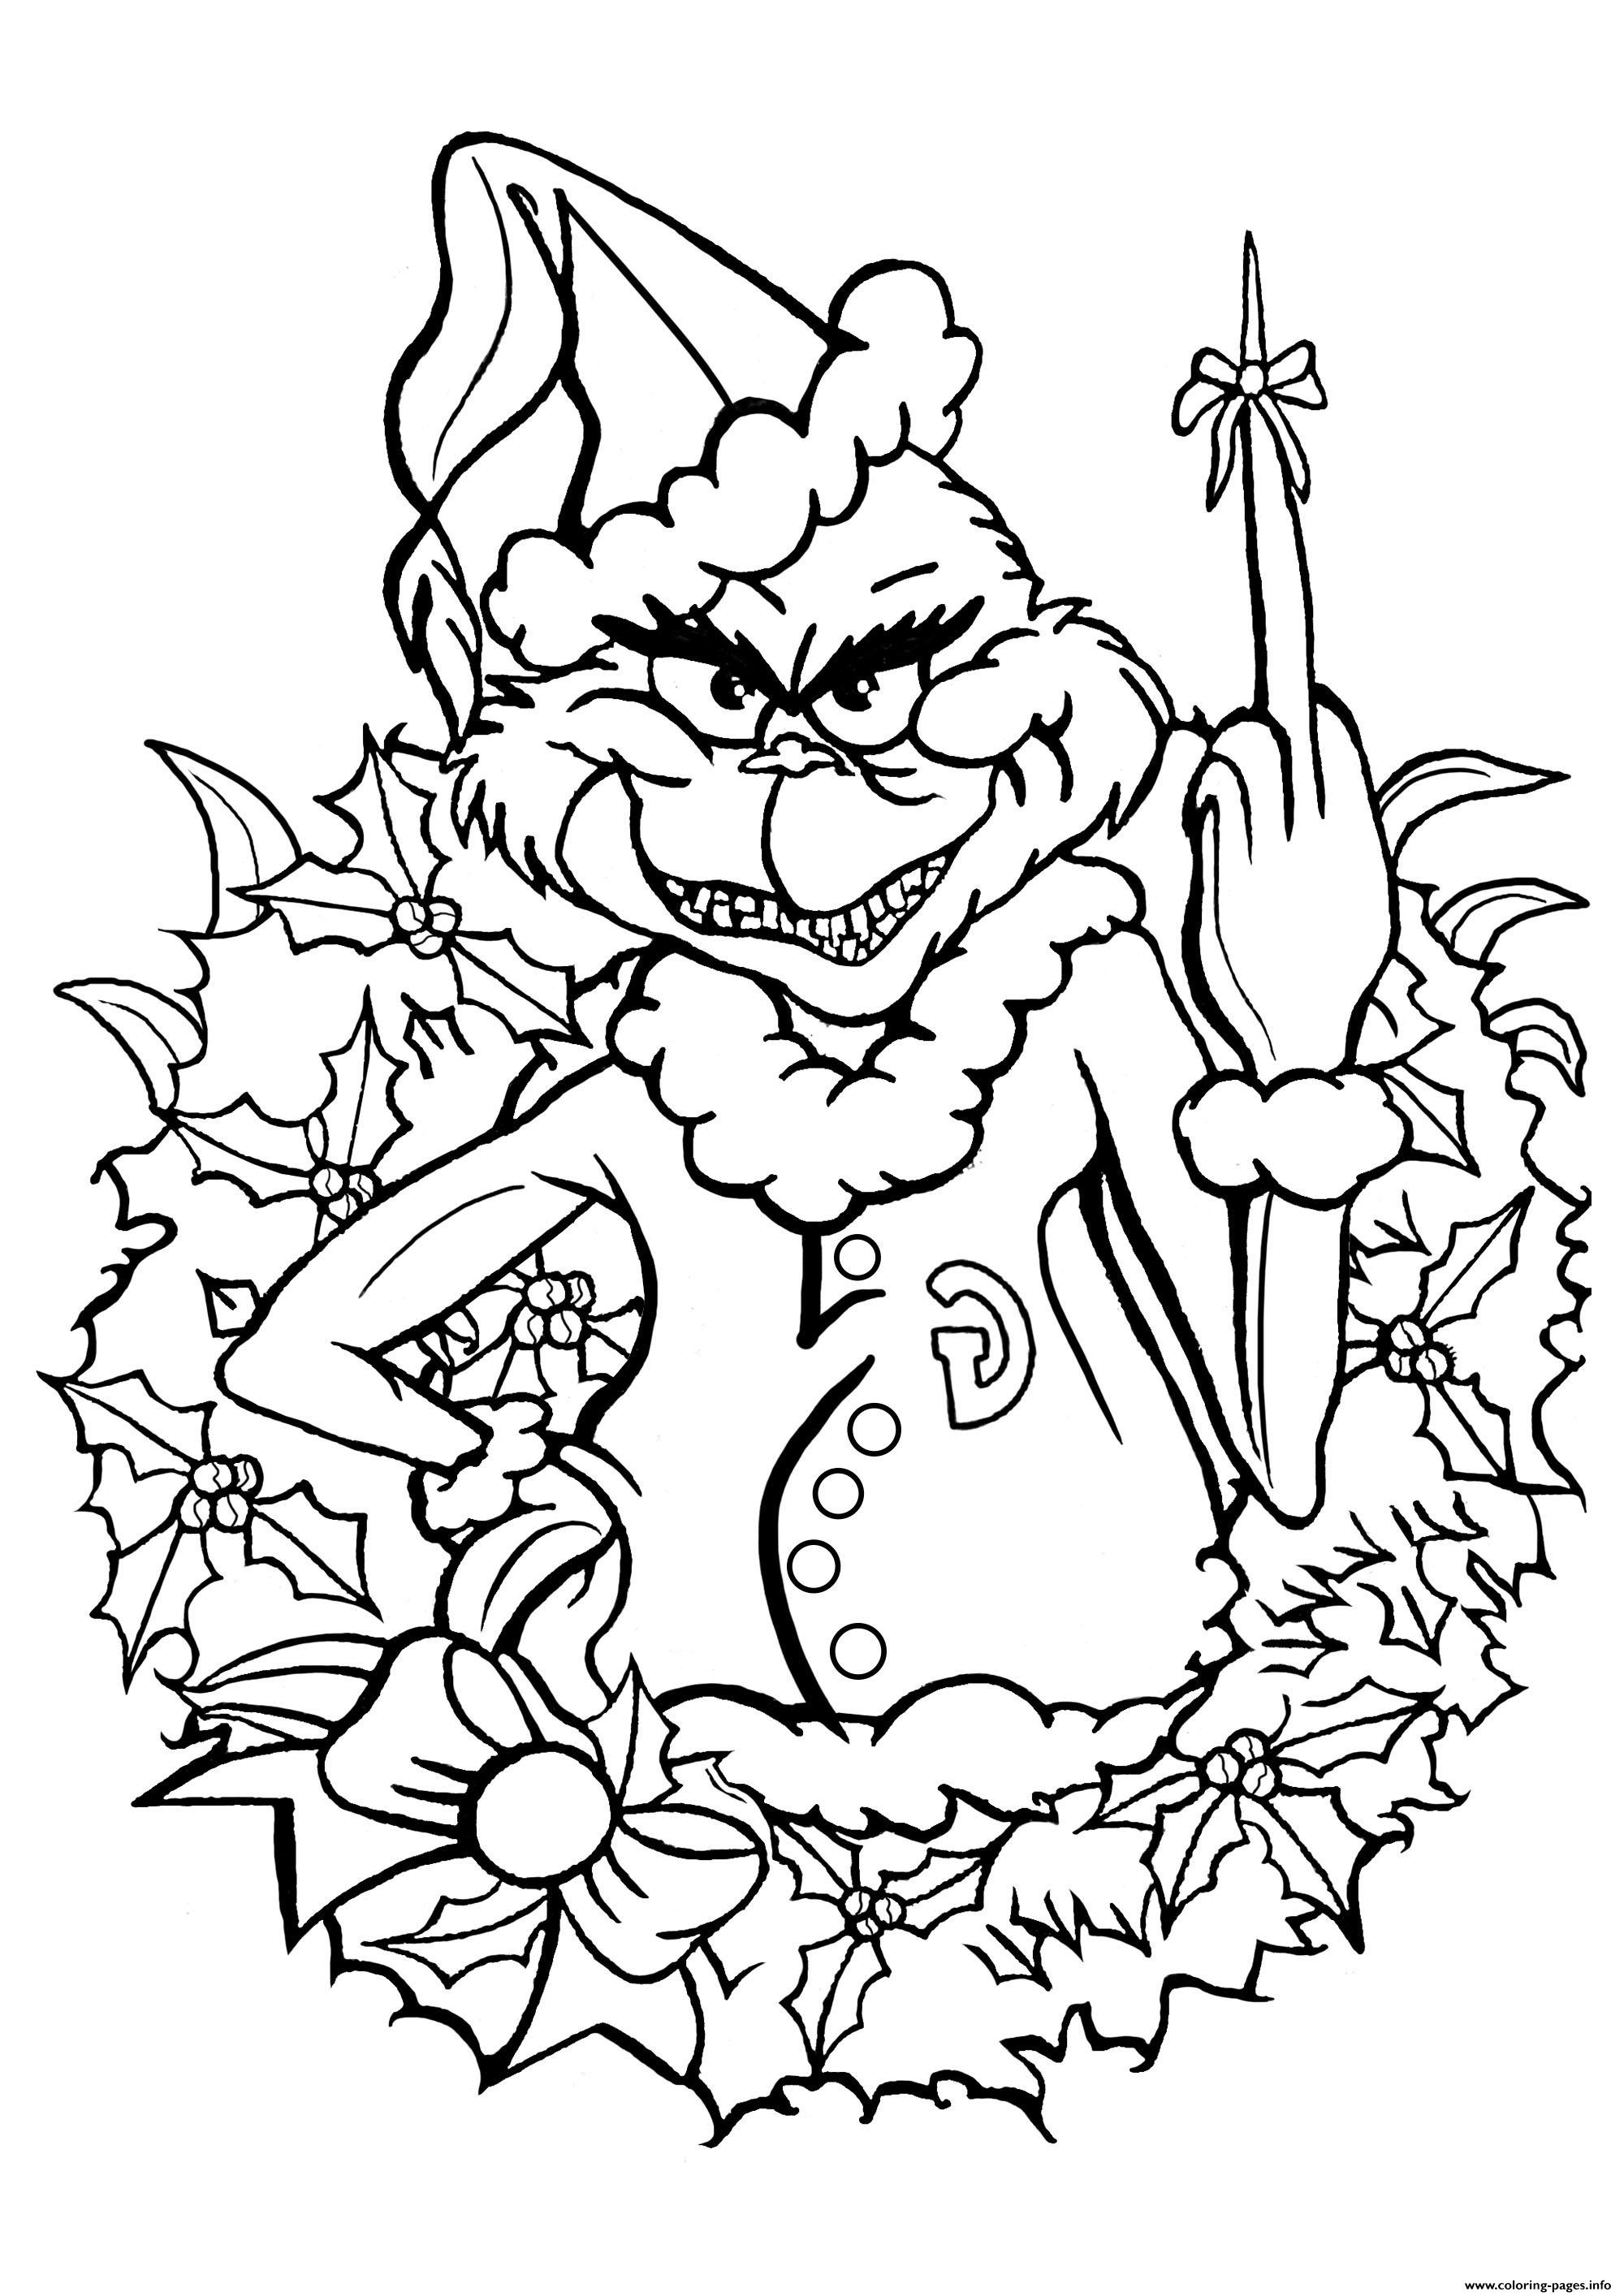 Dr Seuss How The Grinch Stole Christmas Coloring page Printable